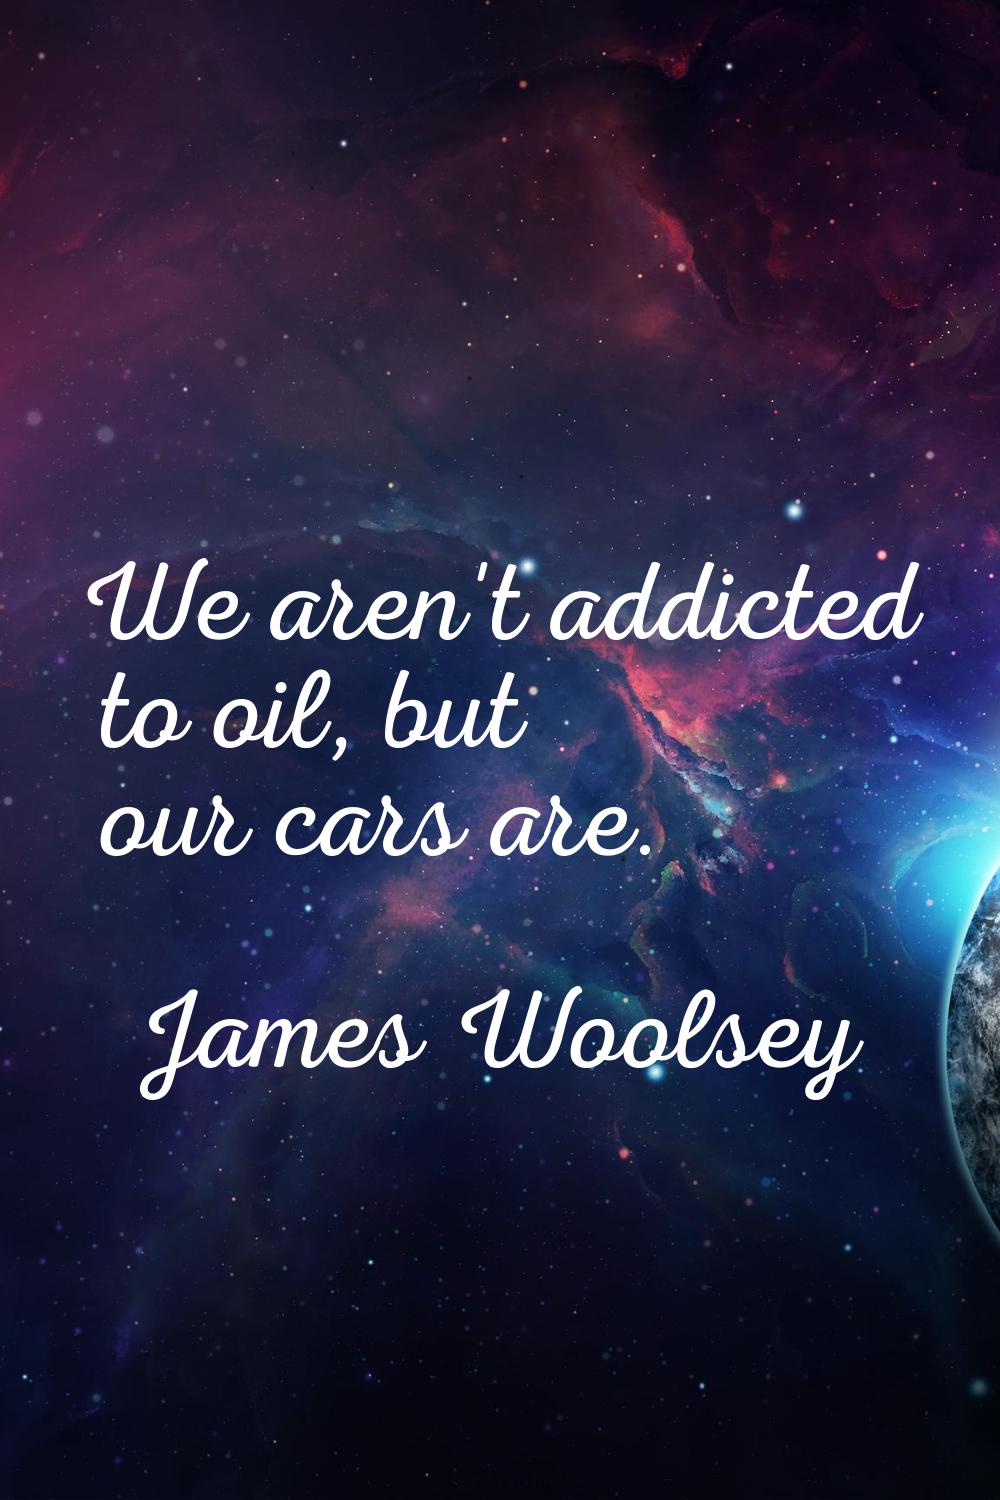 We aren't addicted to oil, but our cars are.